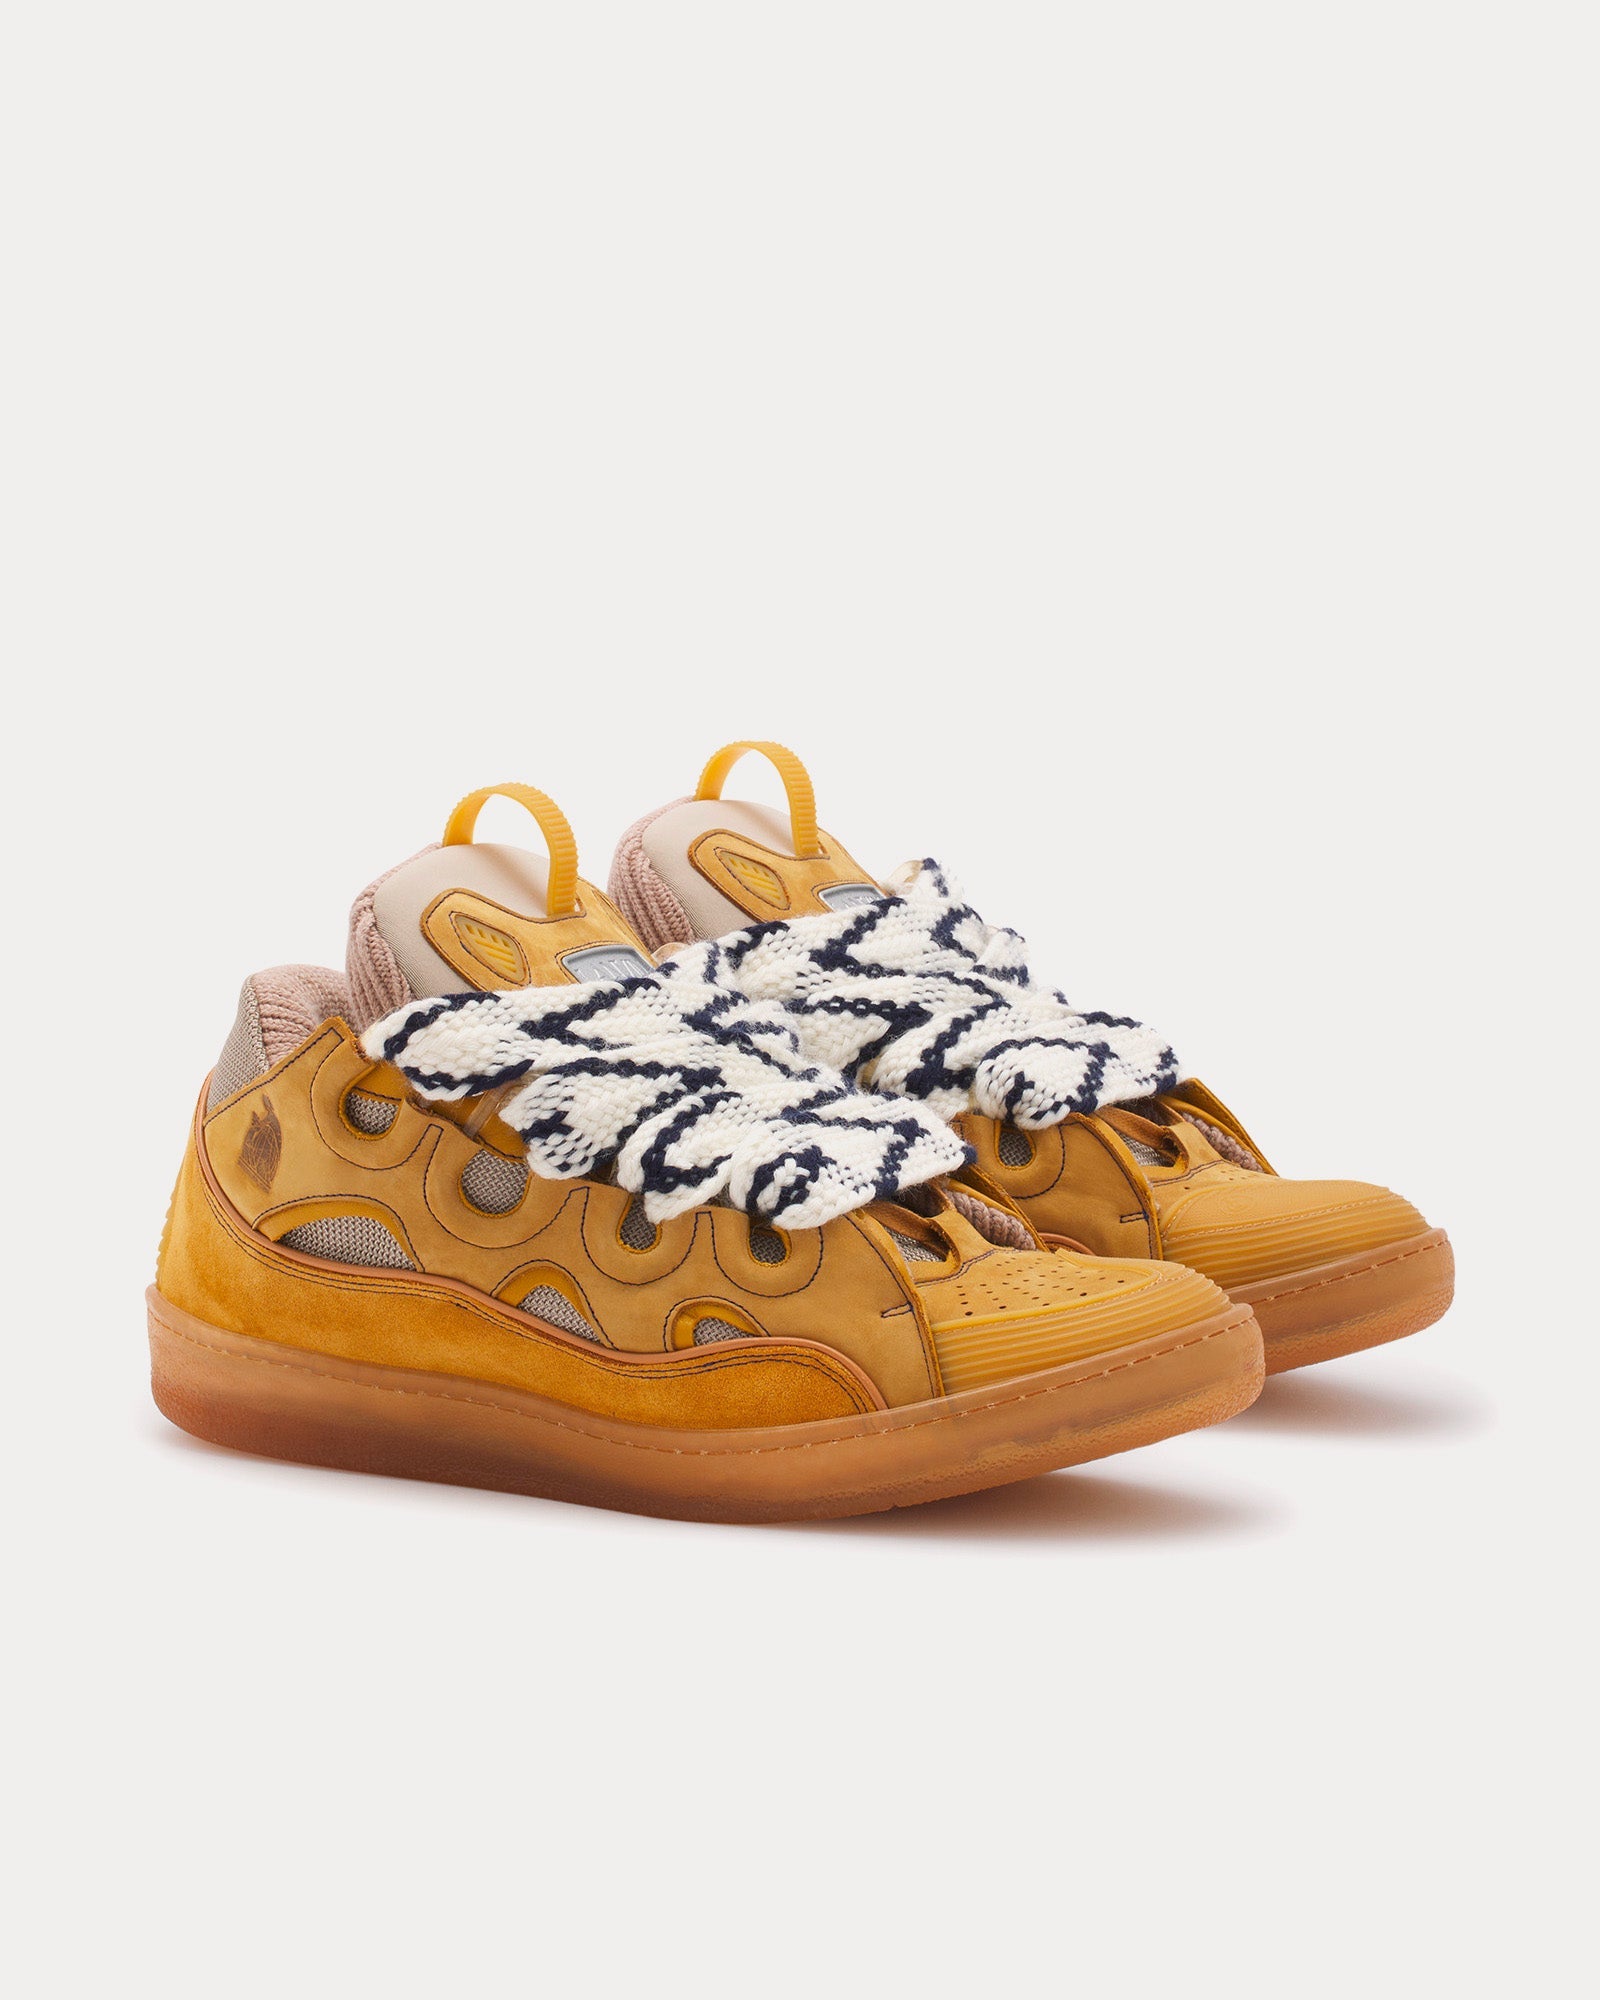 Lanvin - Curb Leather Honey Low Top Sneakers